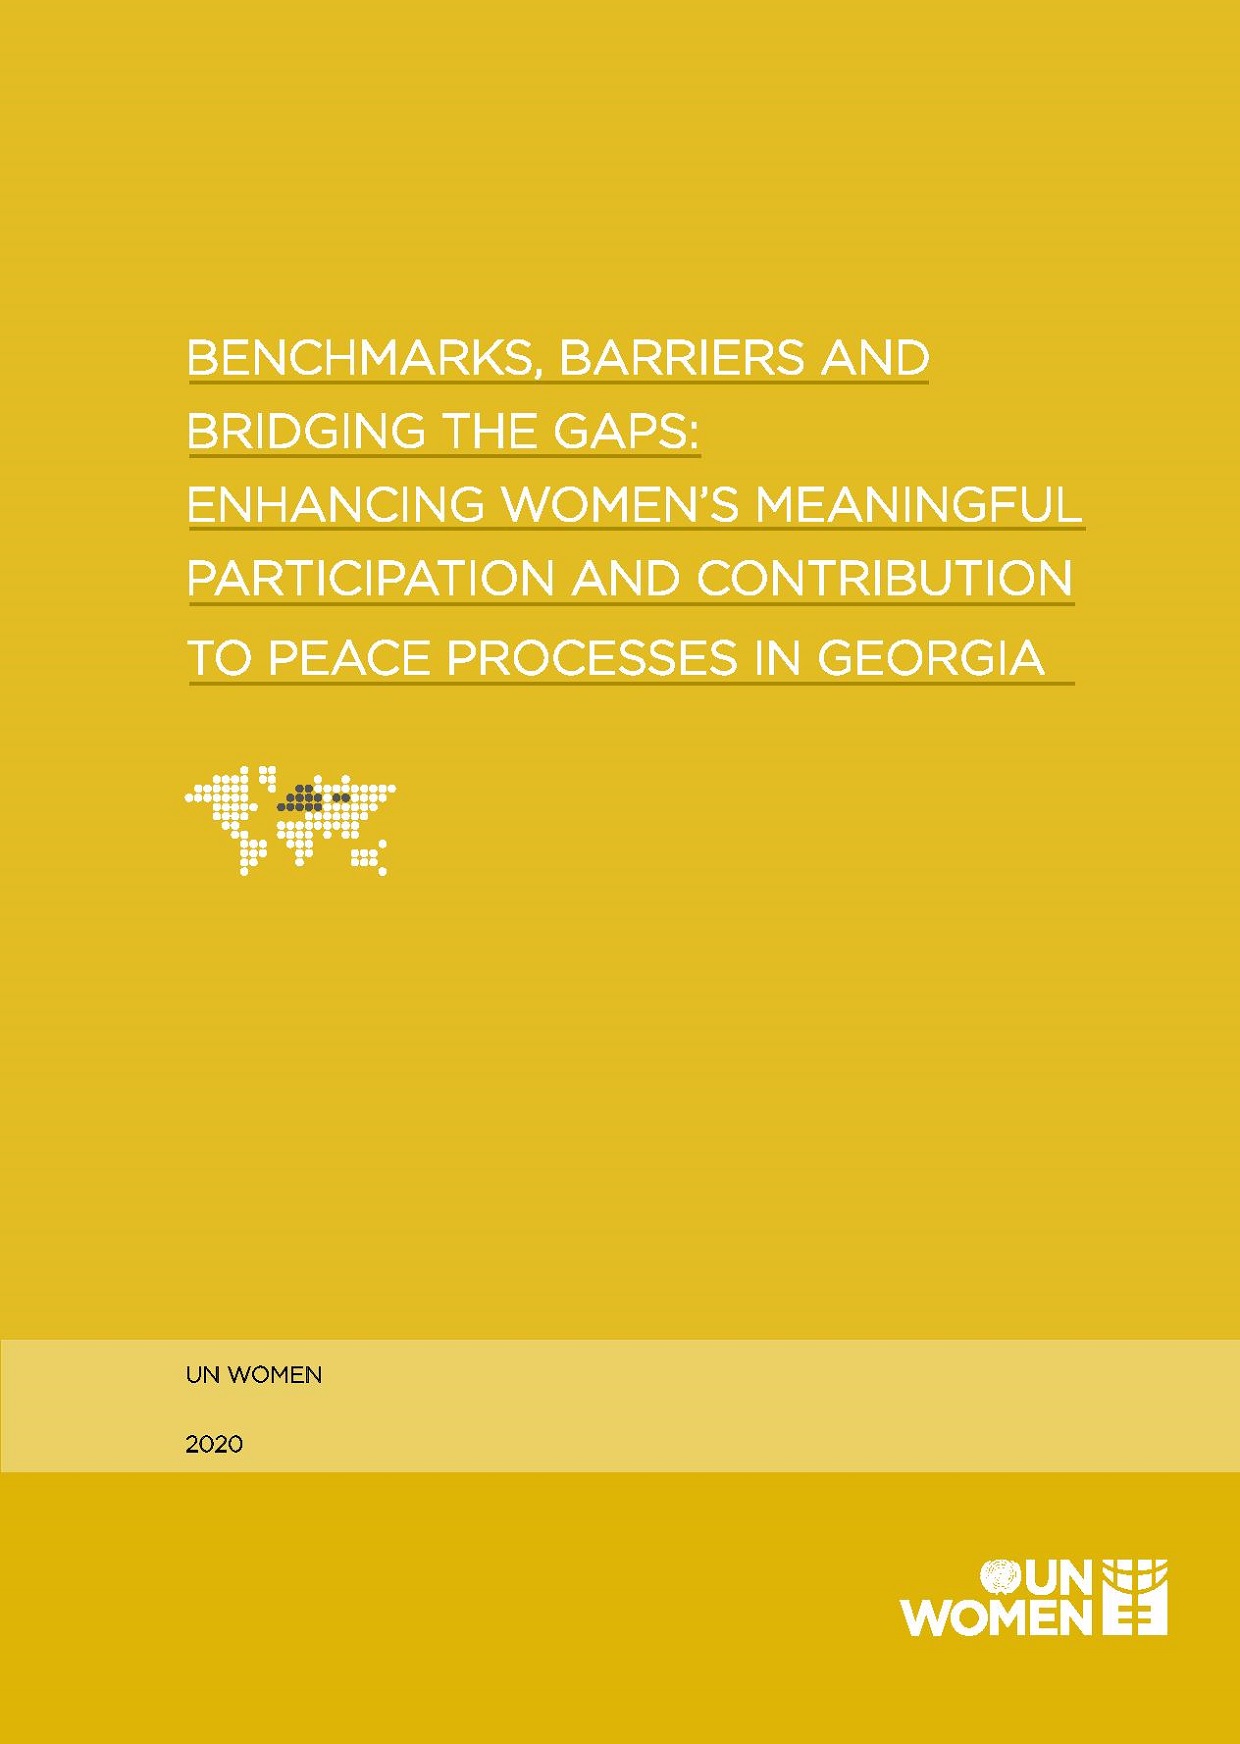 Benchmarks, Barriers and Bridging the Gaps: Enhancing Women's Meaningful Participation and Contribution to Peace Processes in Georgia